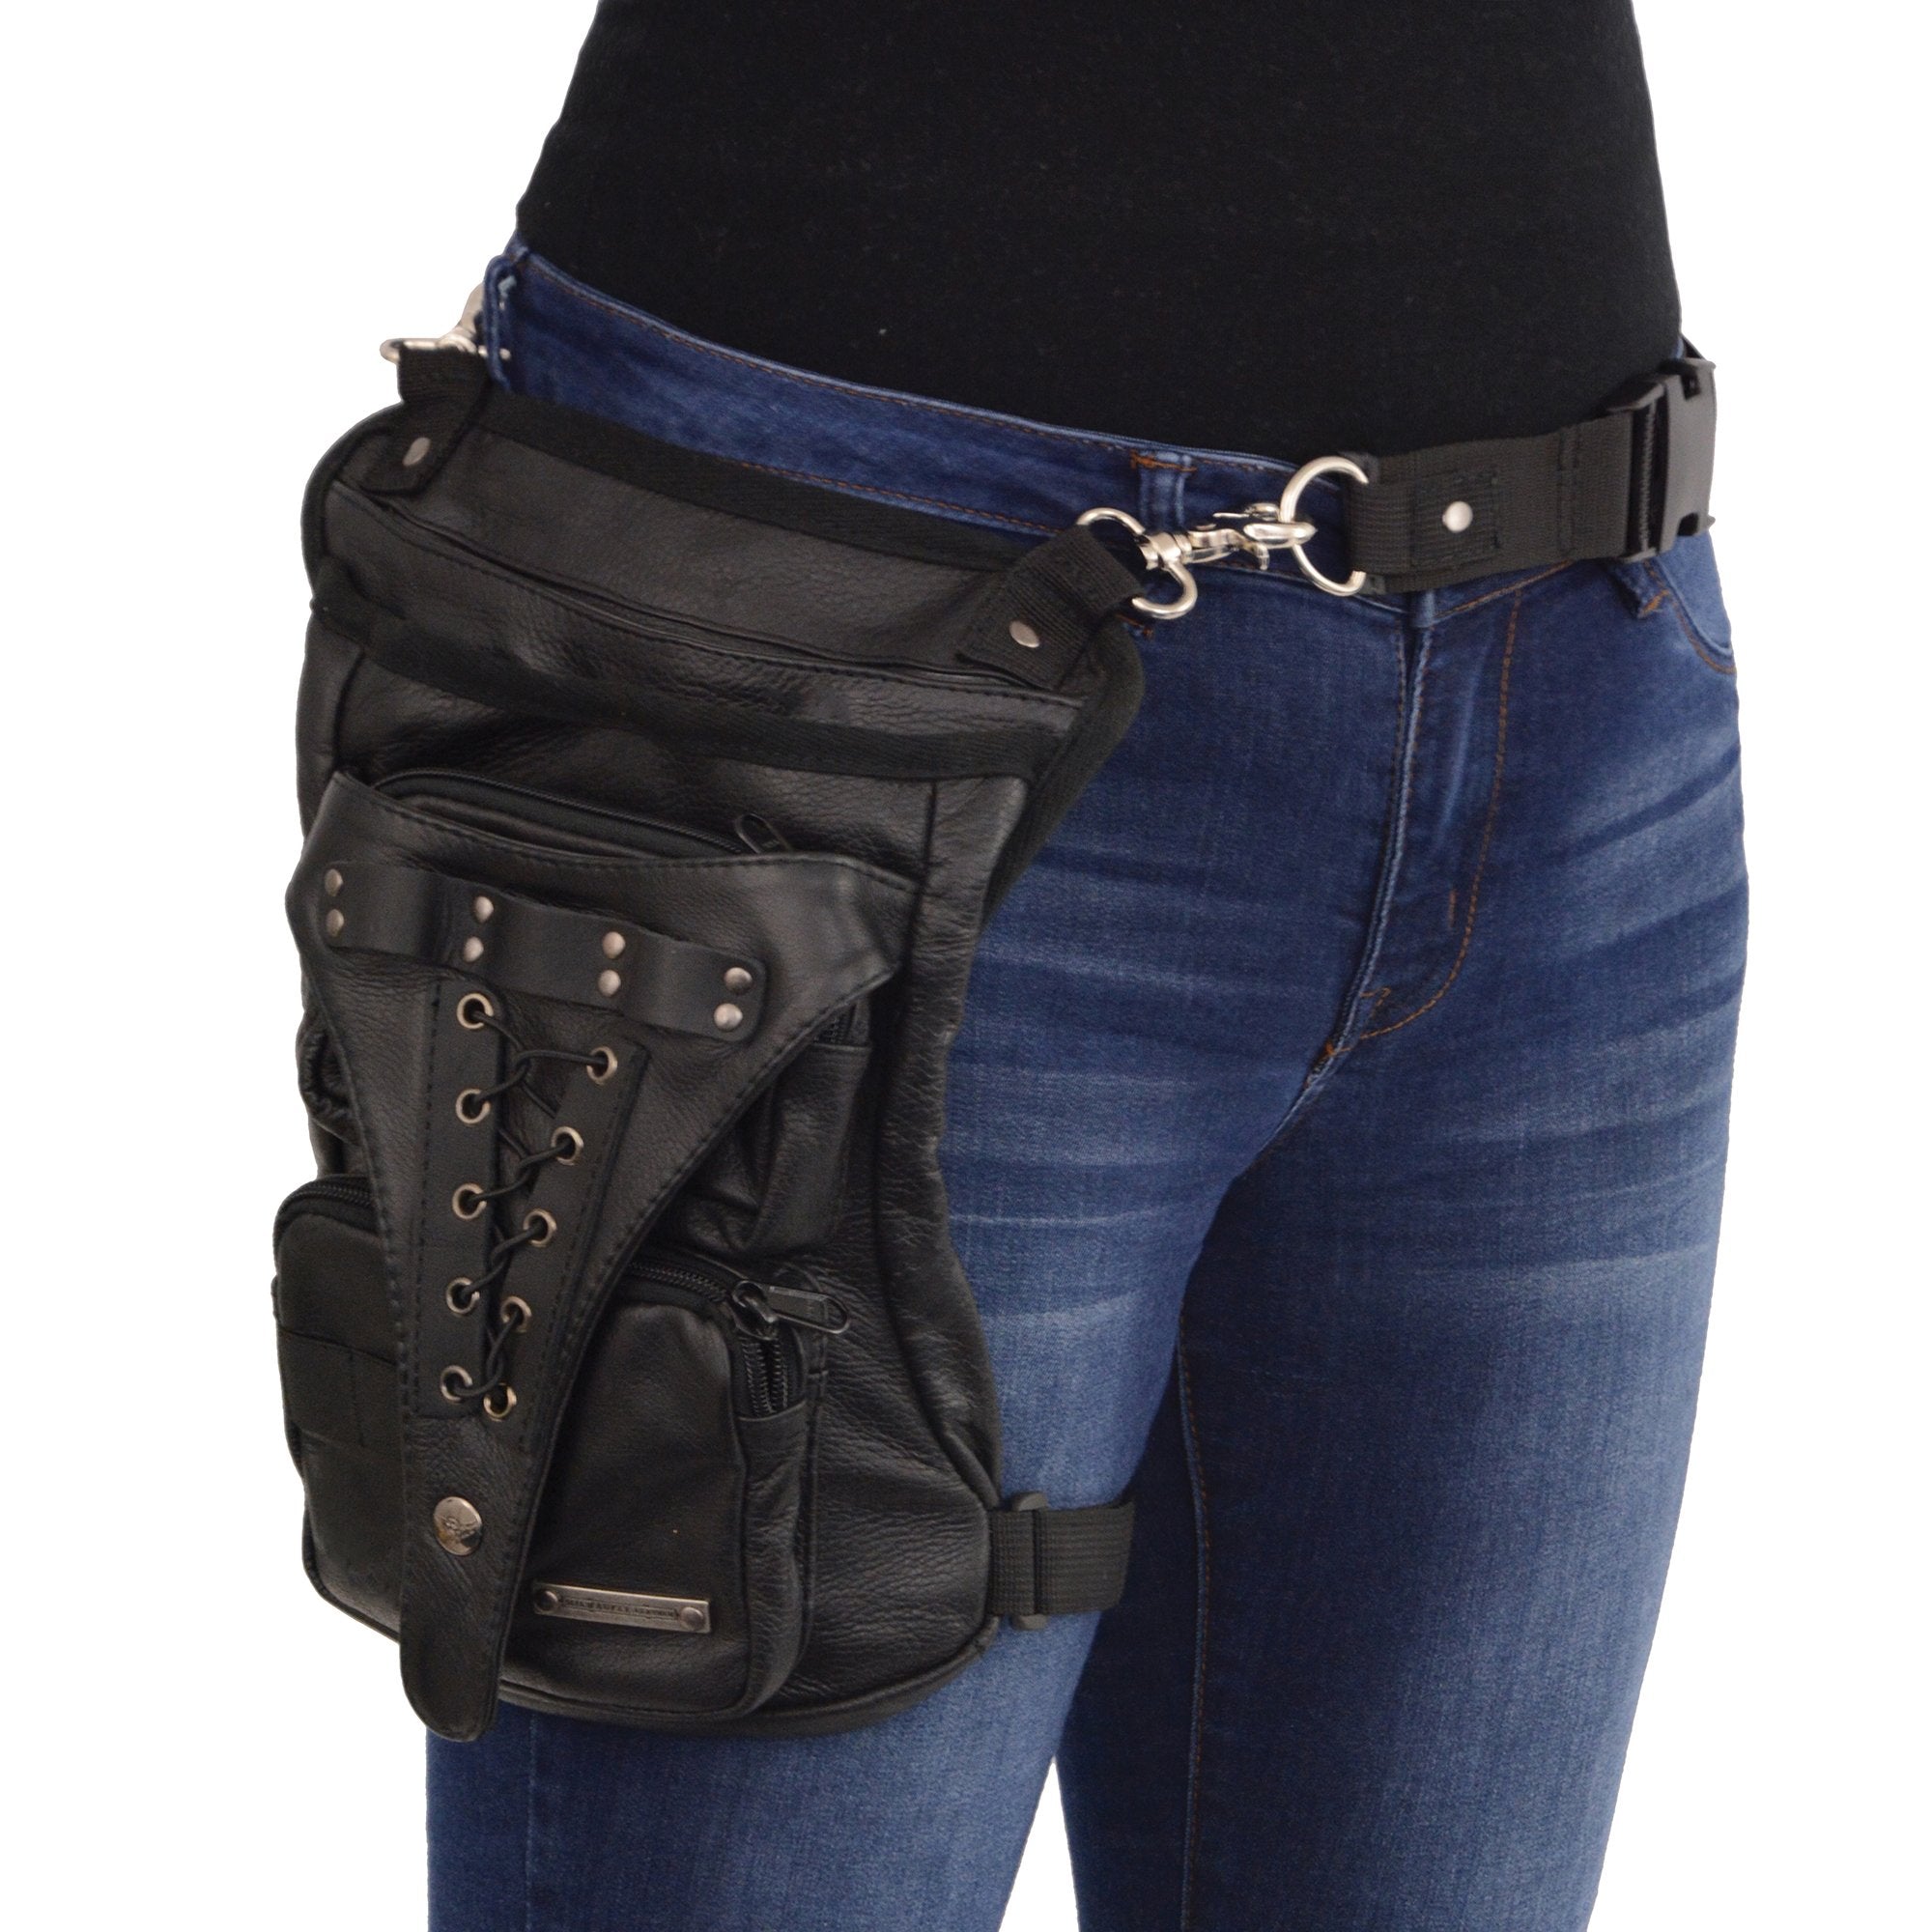 Milwaukee Leather Performance MP8885 Black Conceal and Carry Black Leather Thigh Bag with Waist Belt